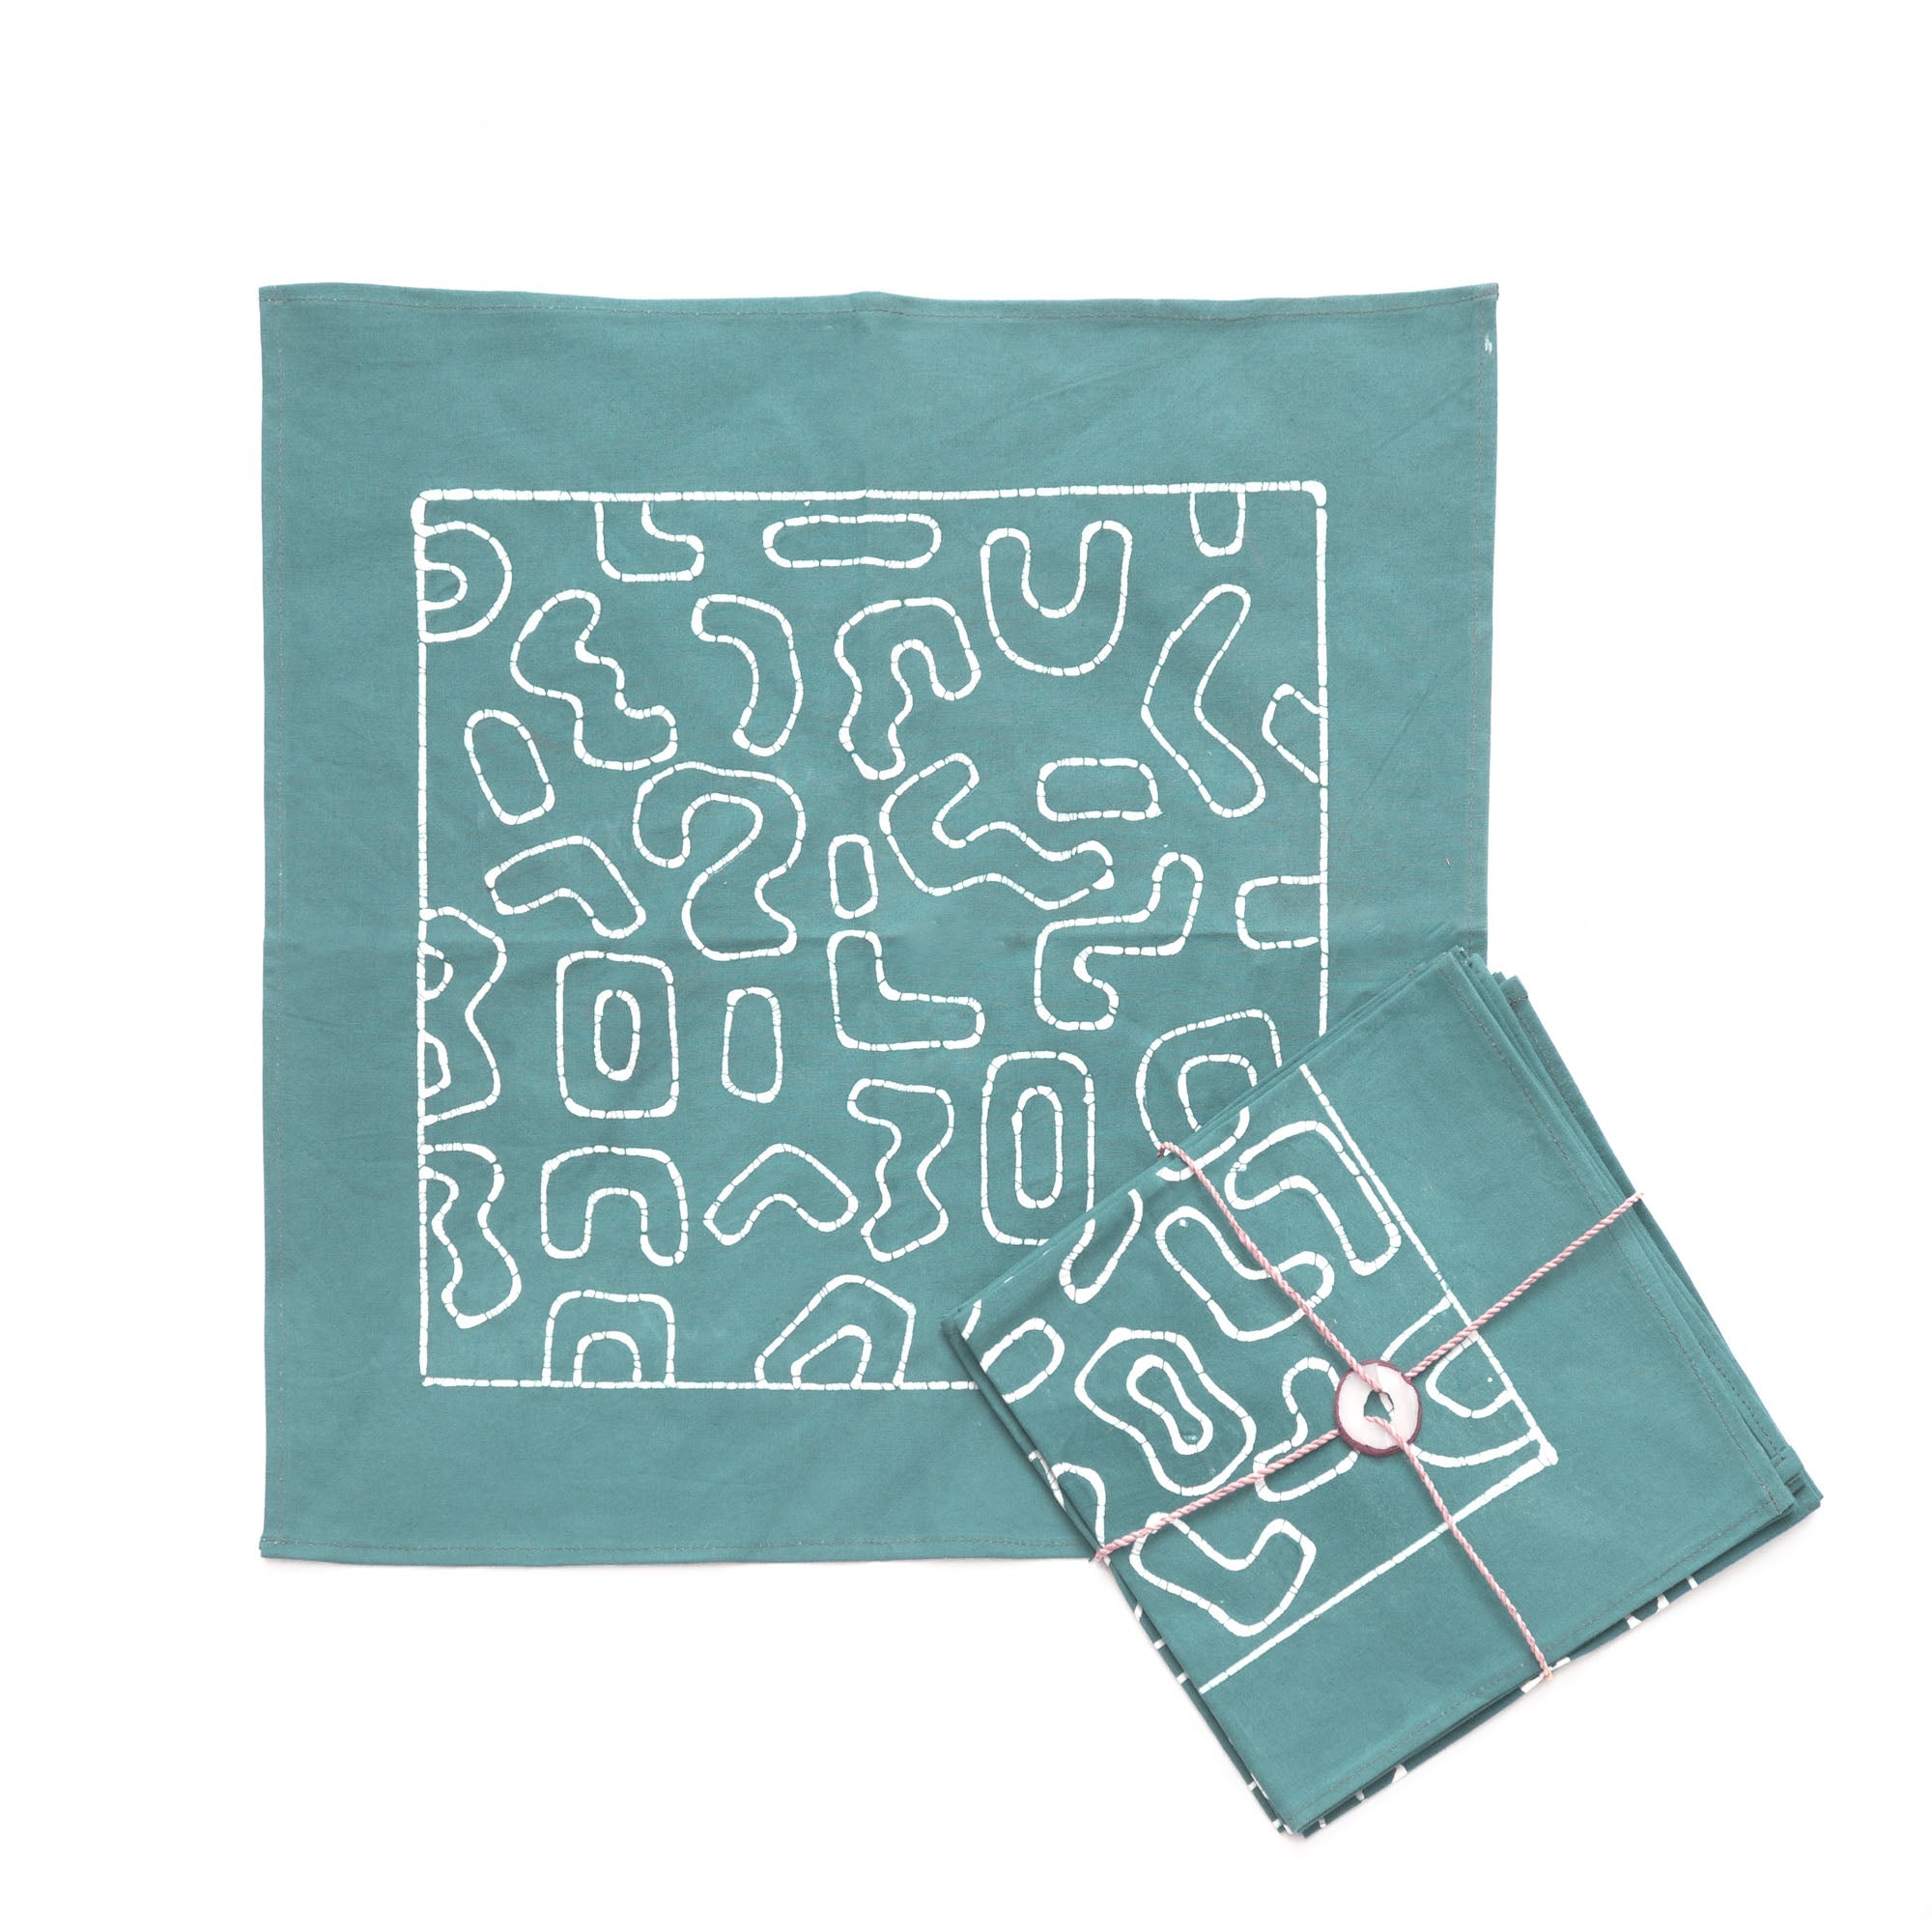 The perfect African made light blue napkins adorned with a squiggle pattern.